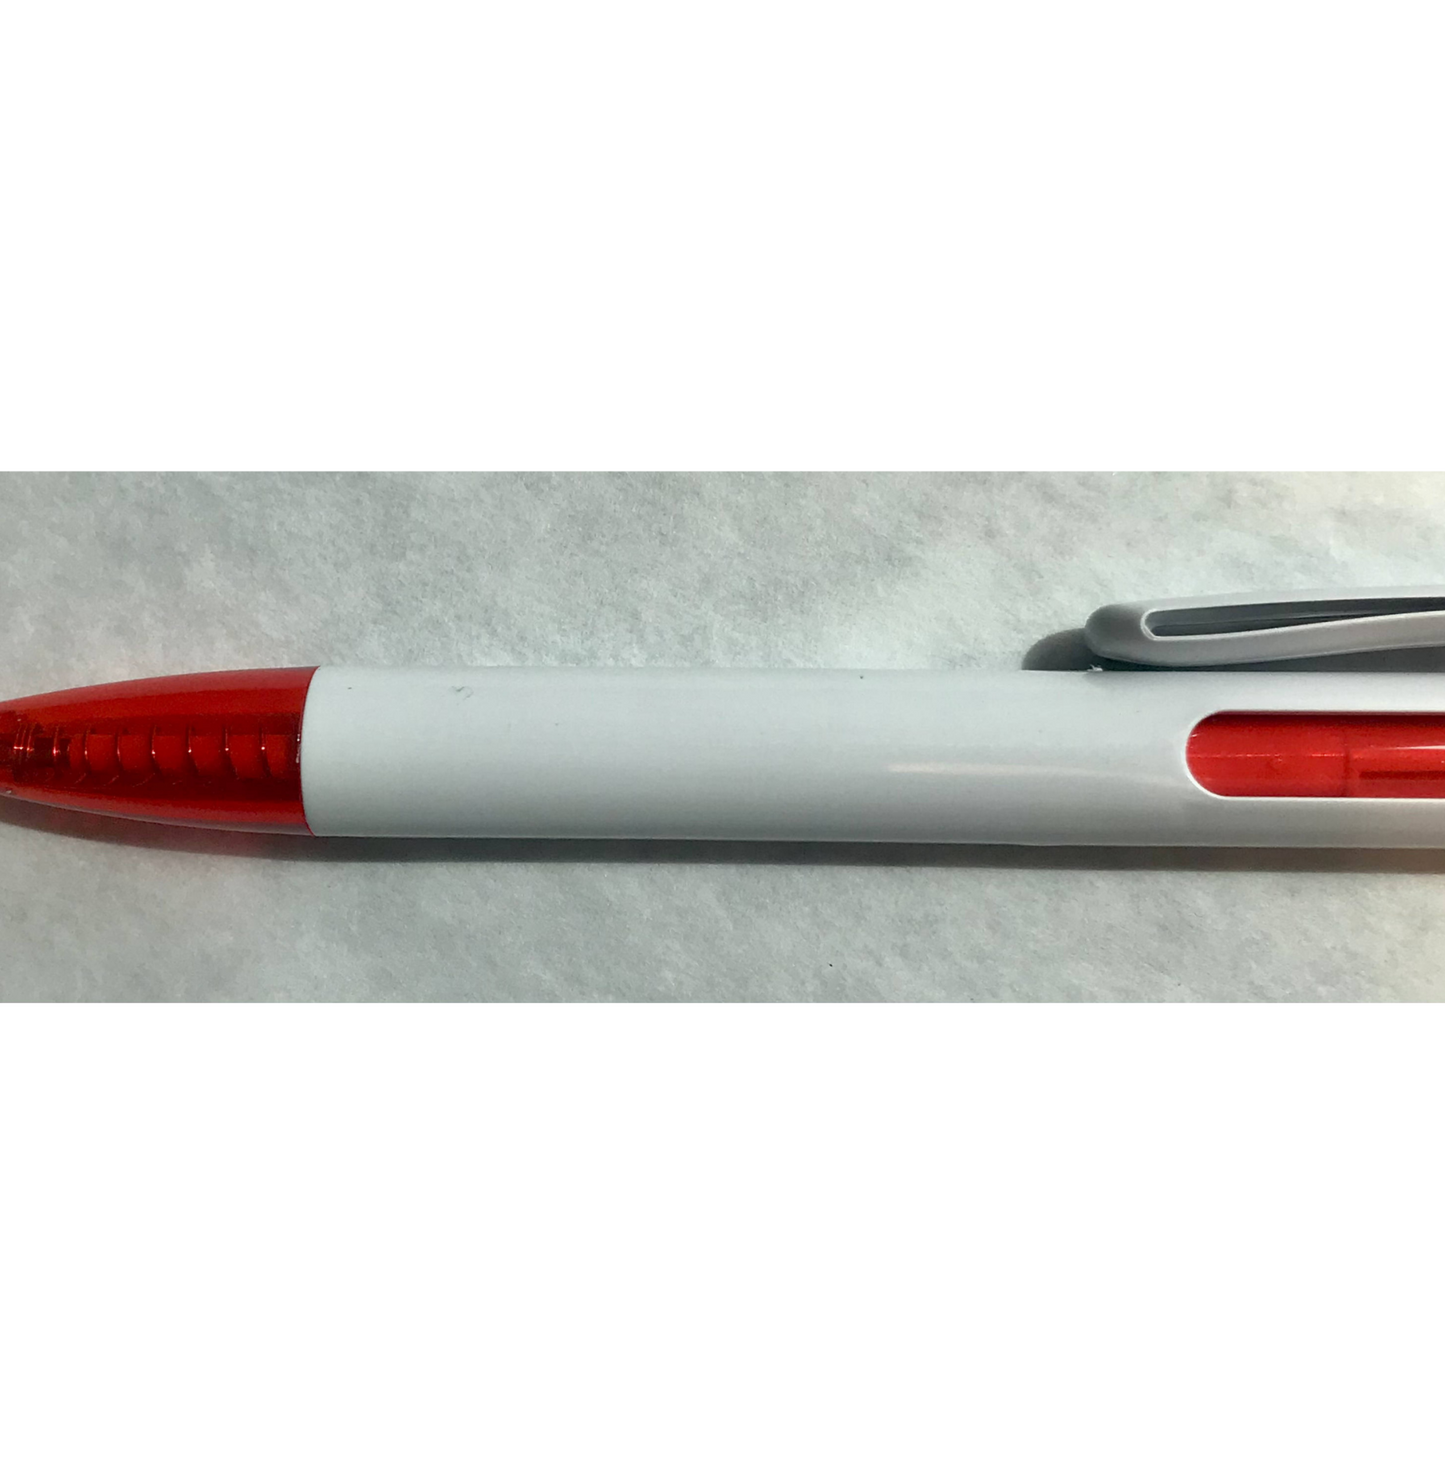 The Groove Pen